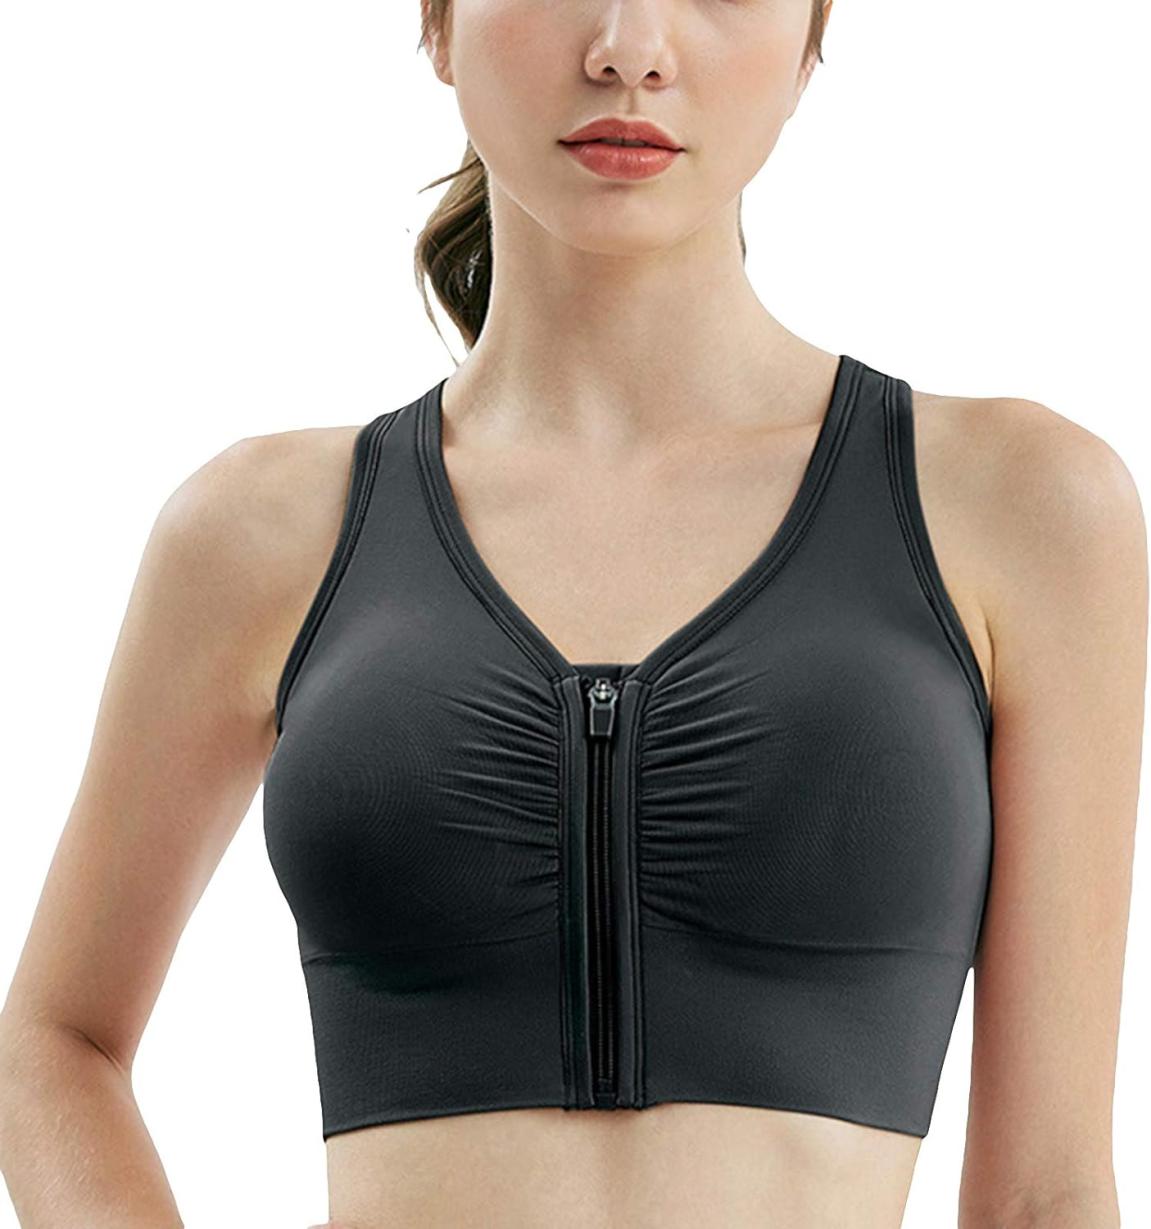 What Are the Different Types of Sports Bras and How Do They Provide Support?